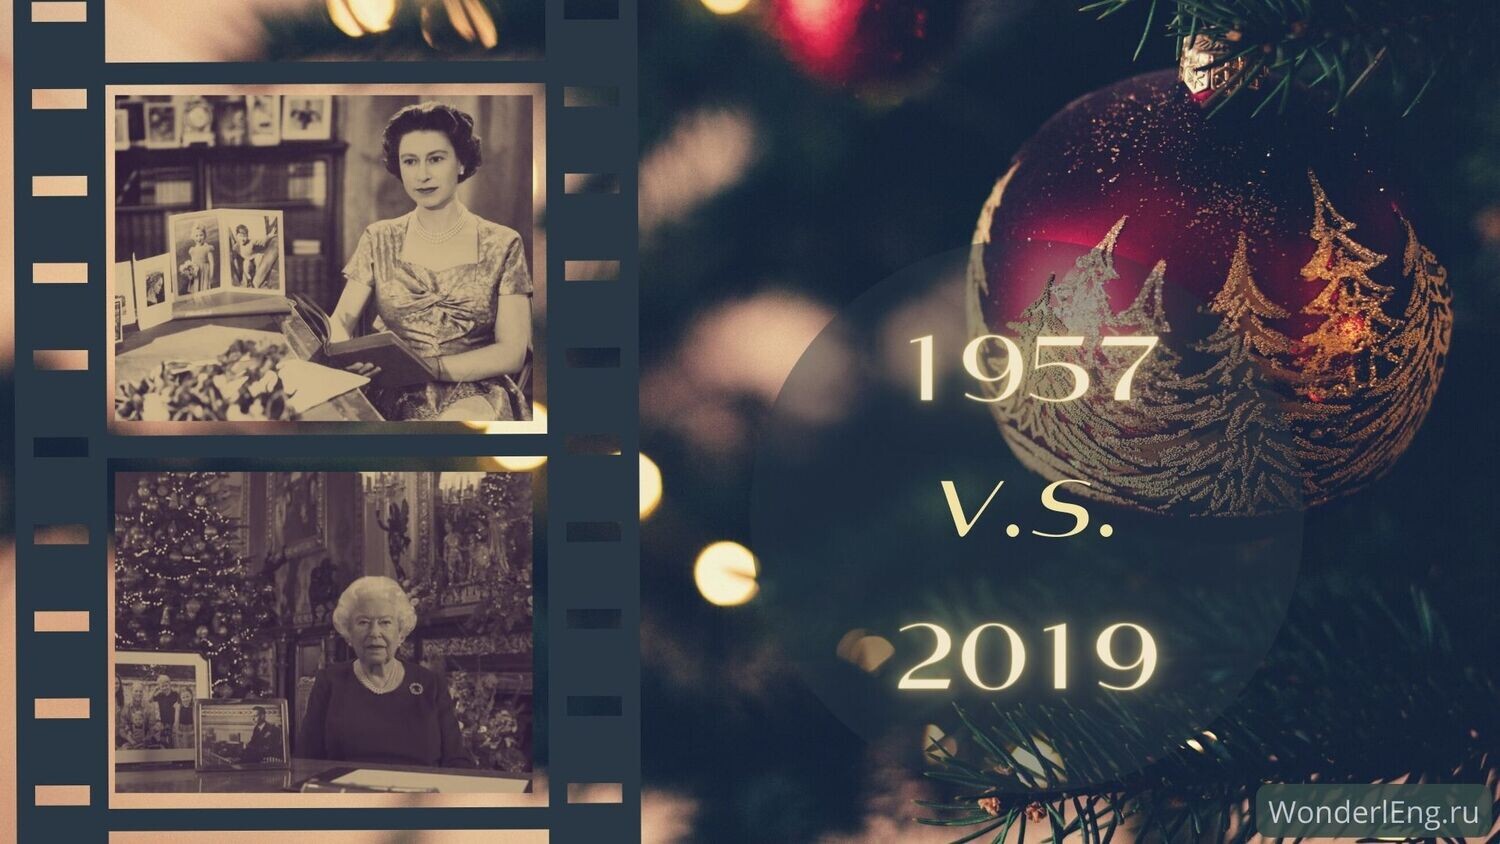 The Queen's Christmas Messages: 1957 vs 2019